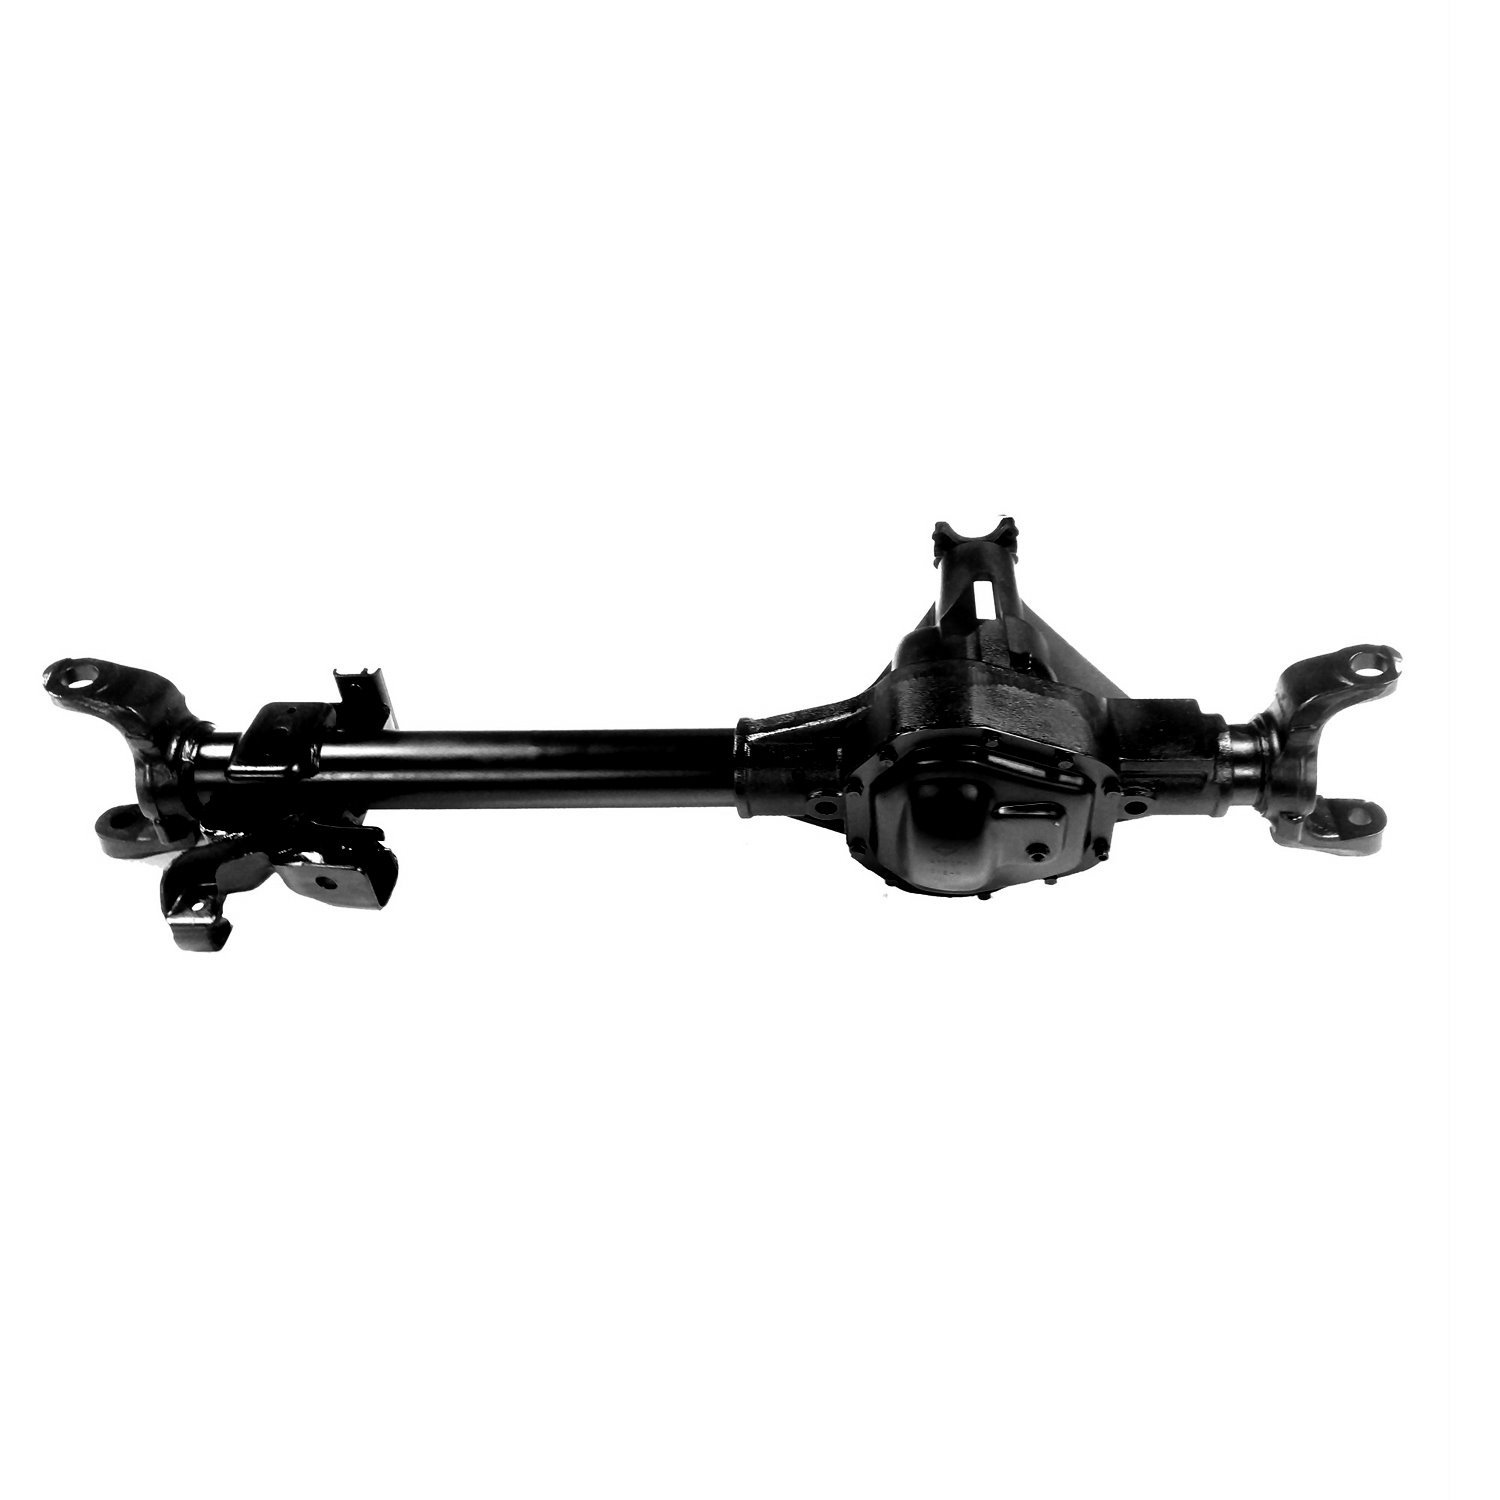 Remanufactured Complete Axle Assembly for Dana 60 08-10 F350 3.73 , DRW w/o Wide Track